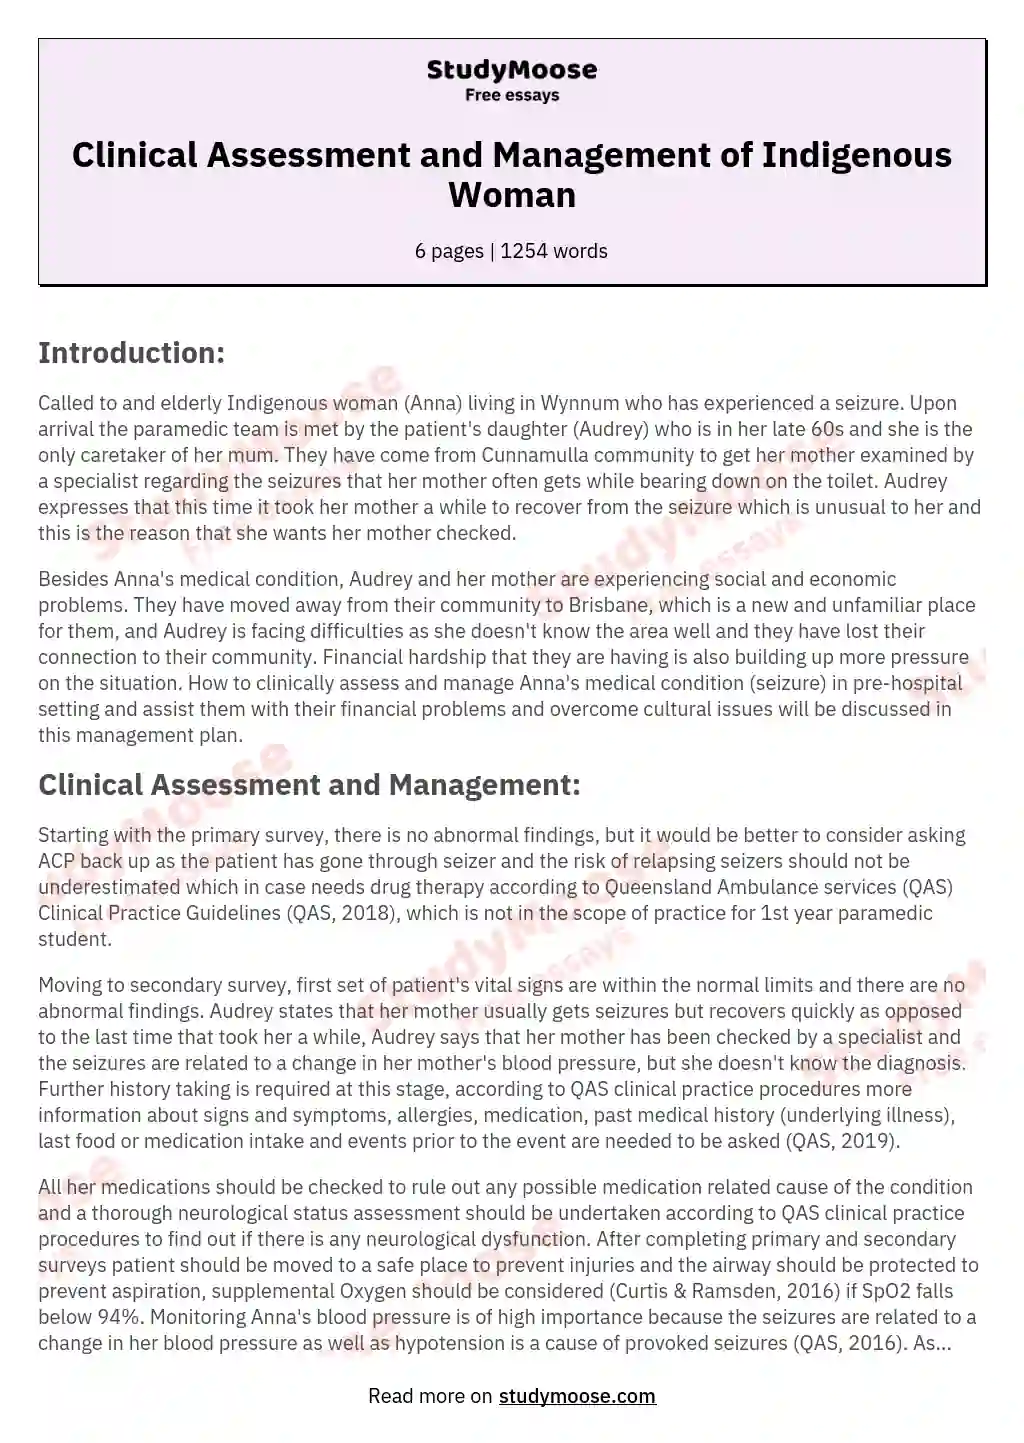 Clinical Assessment and Management of Indigenous Woman essay